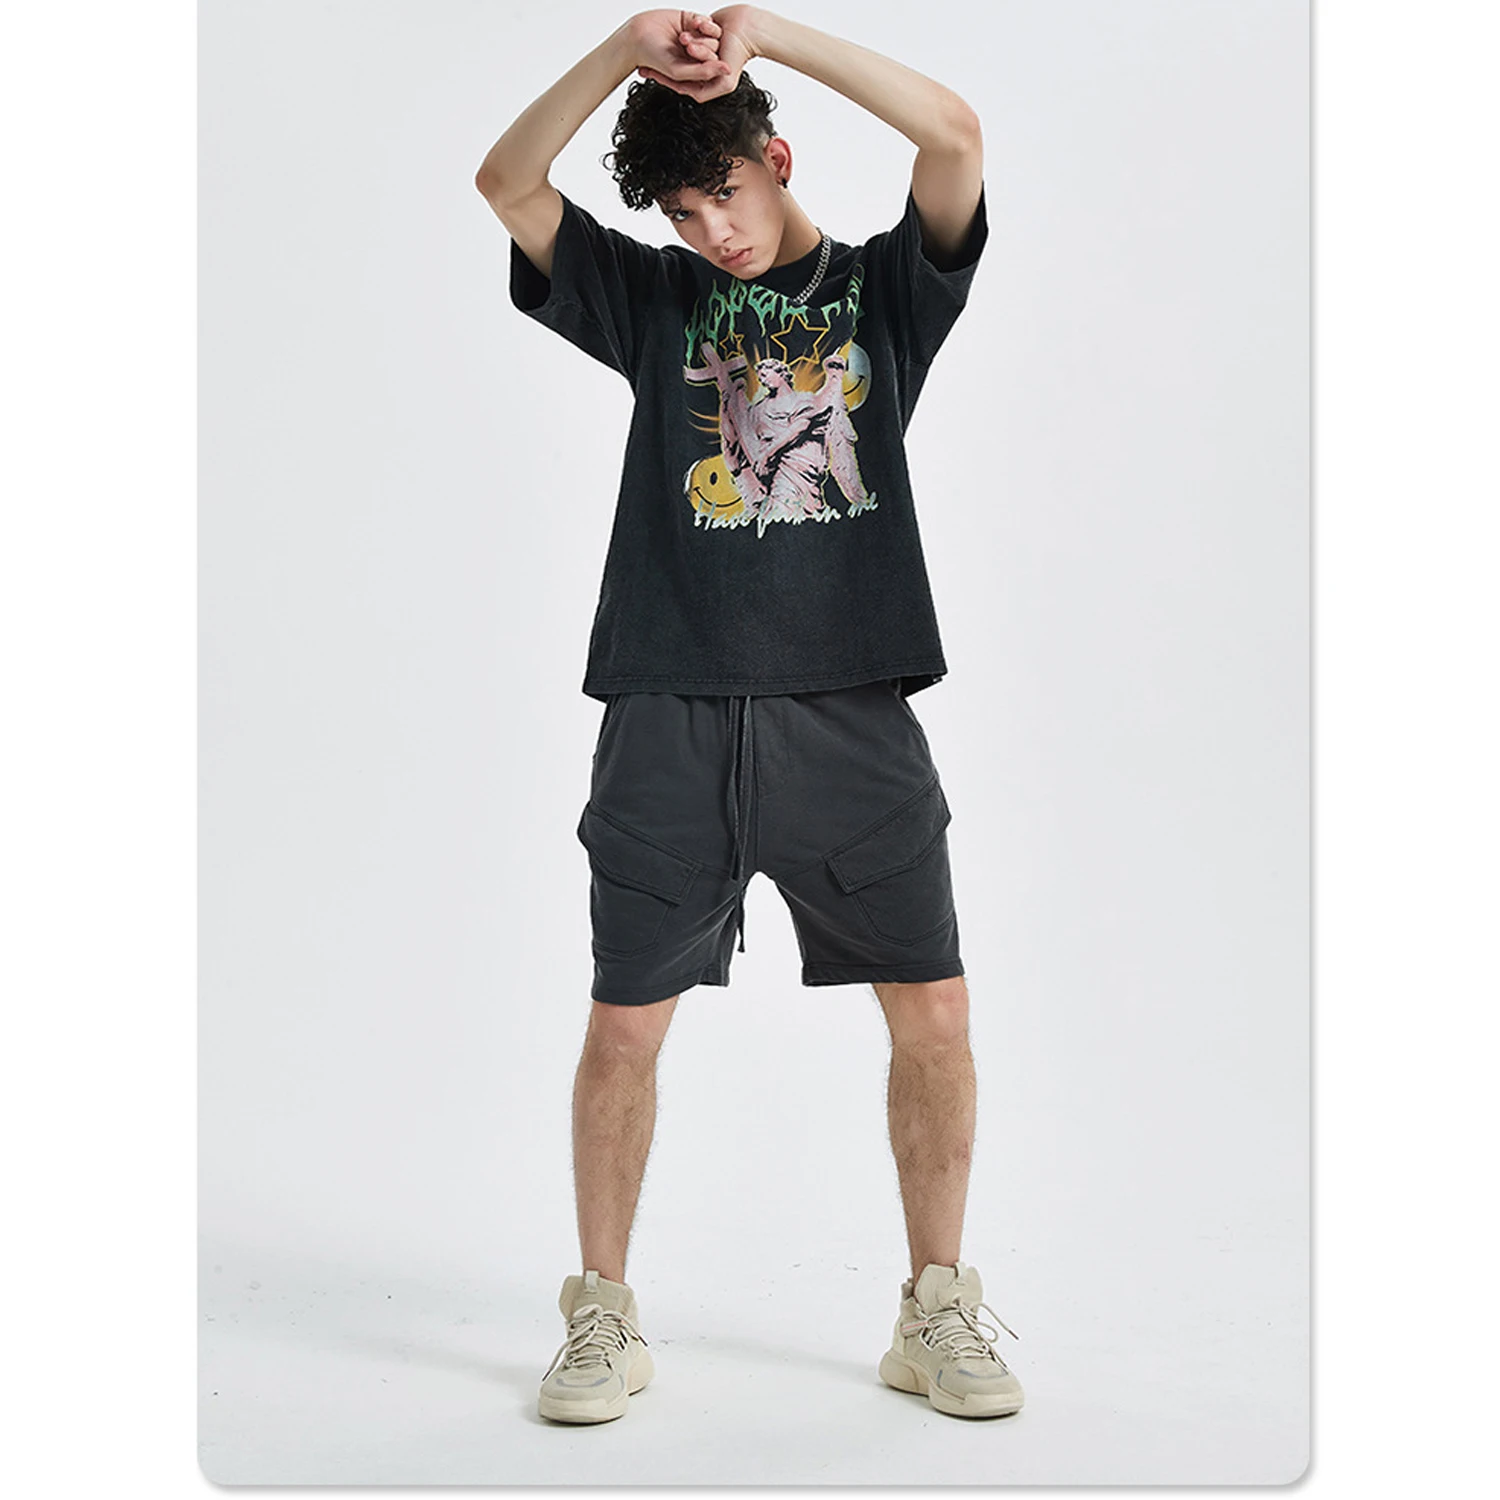 New Men's Summer T-Shirt 100% Cotton Loose Short-Sleeved with Neck Collar Eco-Friendly and Anti-Pilling Fashion Letter Print